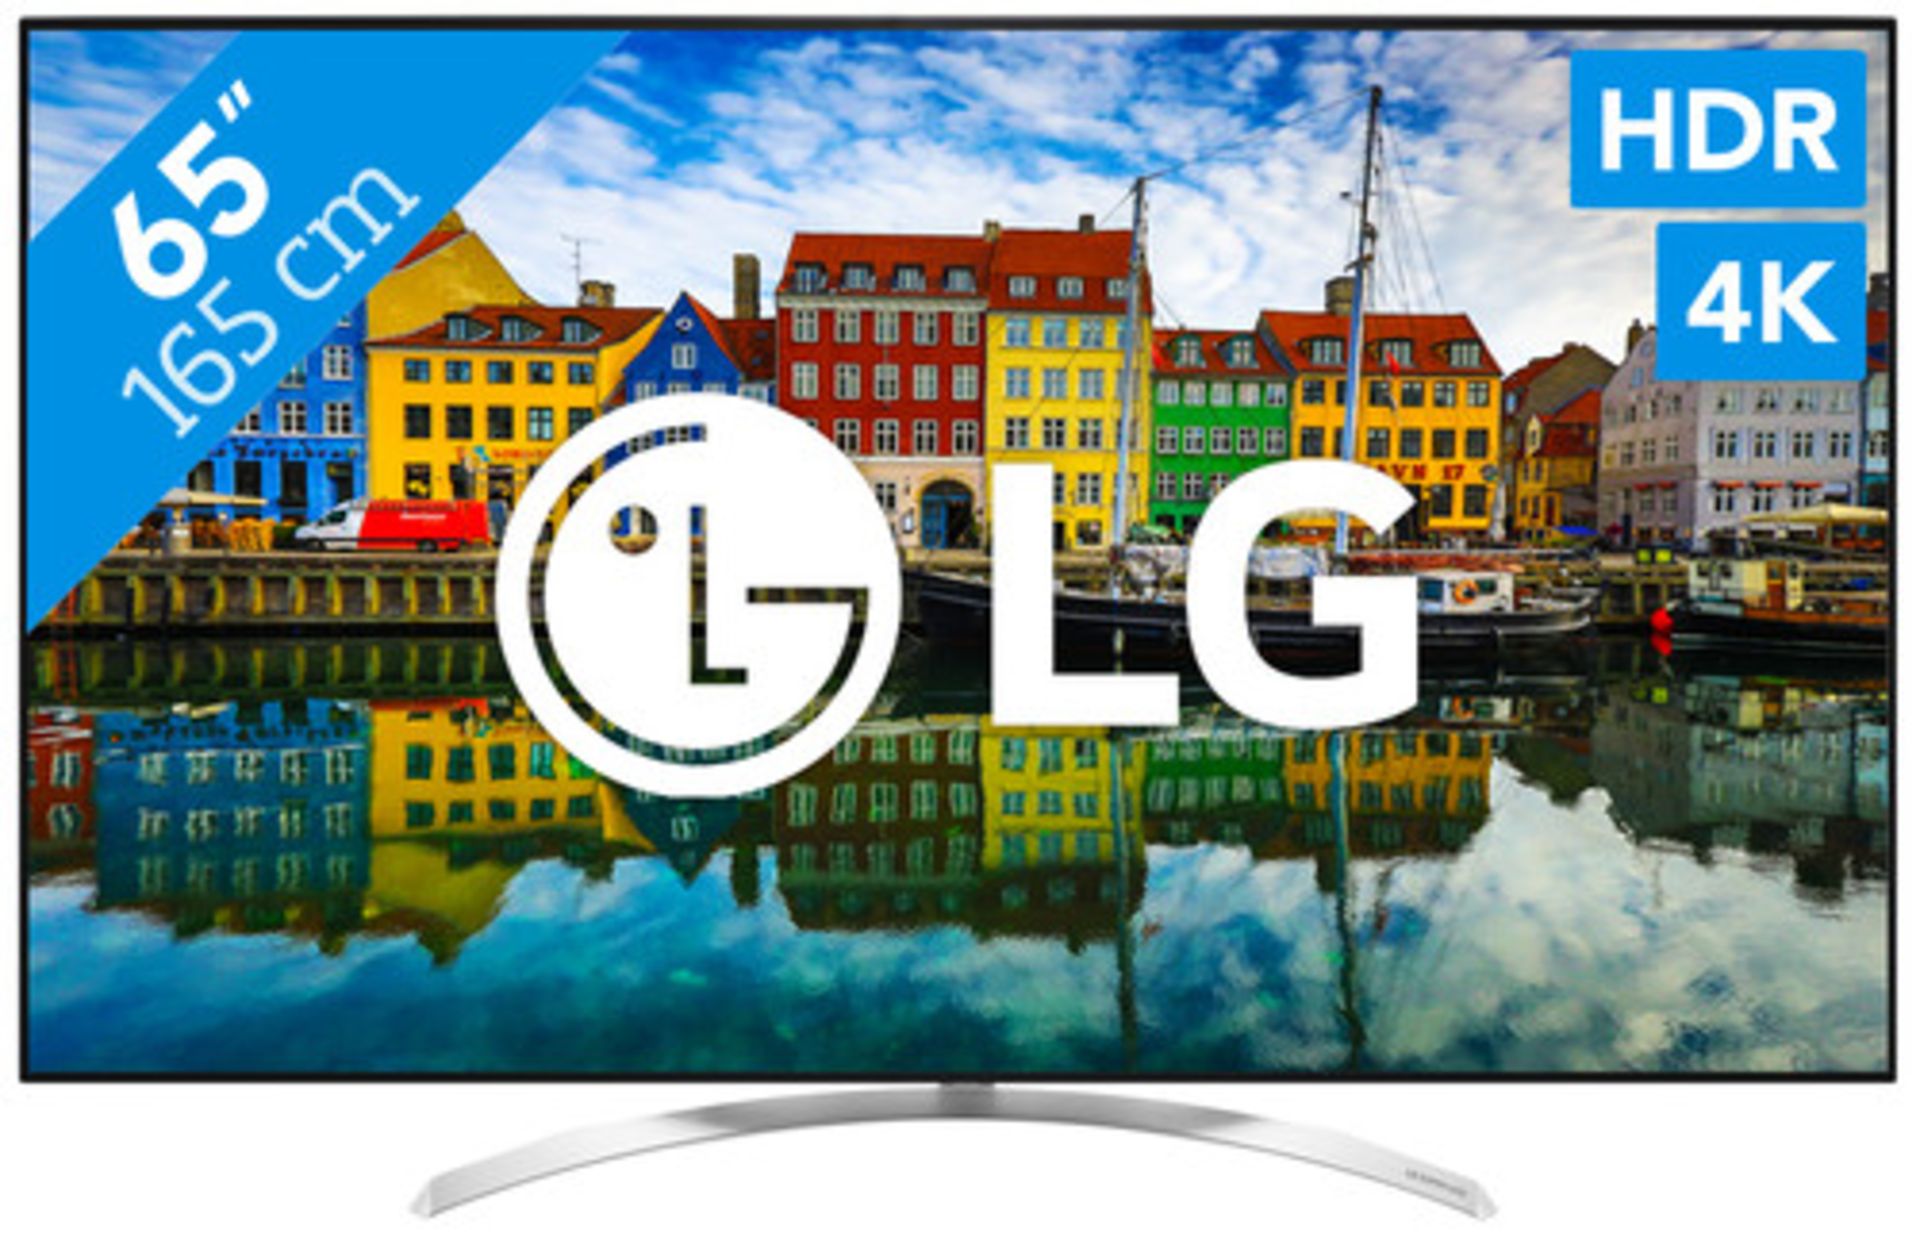 V Grade A LG 65 Inch ACTIVE HDR 4K SUPER ULTRA HD LED SMART TV WITH FREEVIEW HD & WEBOS 3.5 & WIFI -